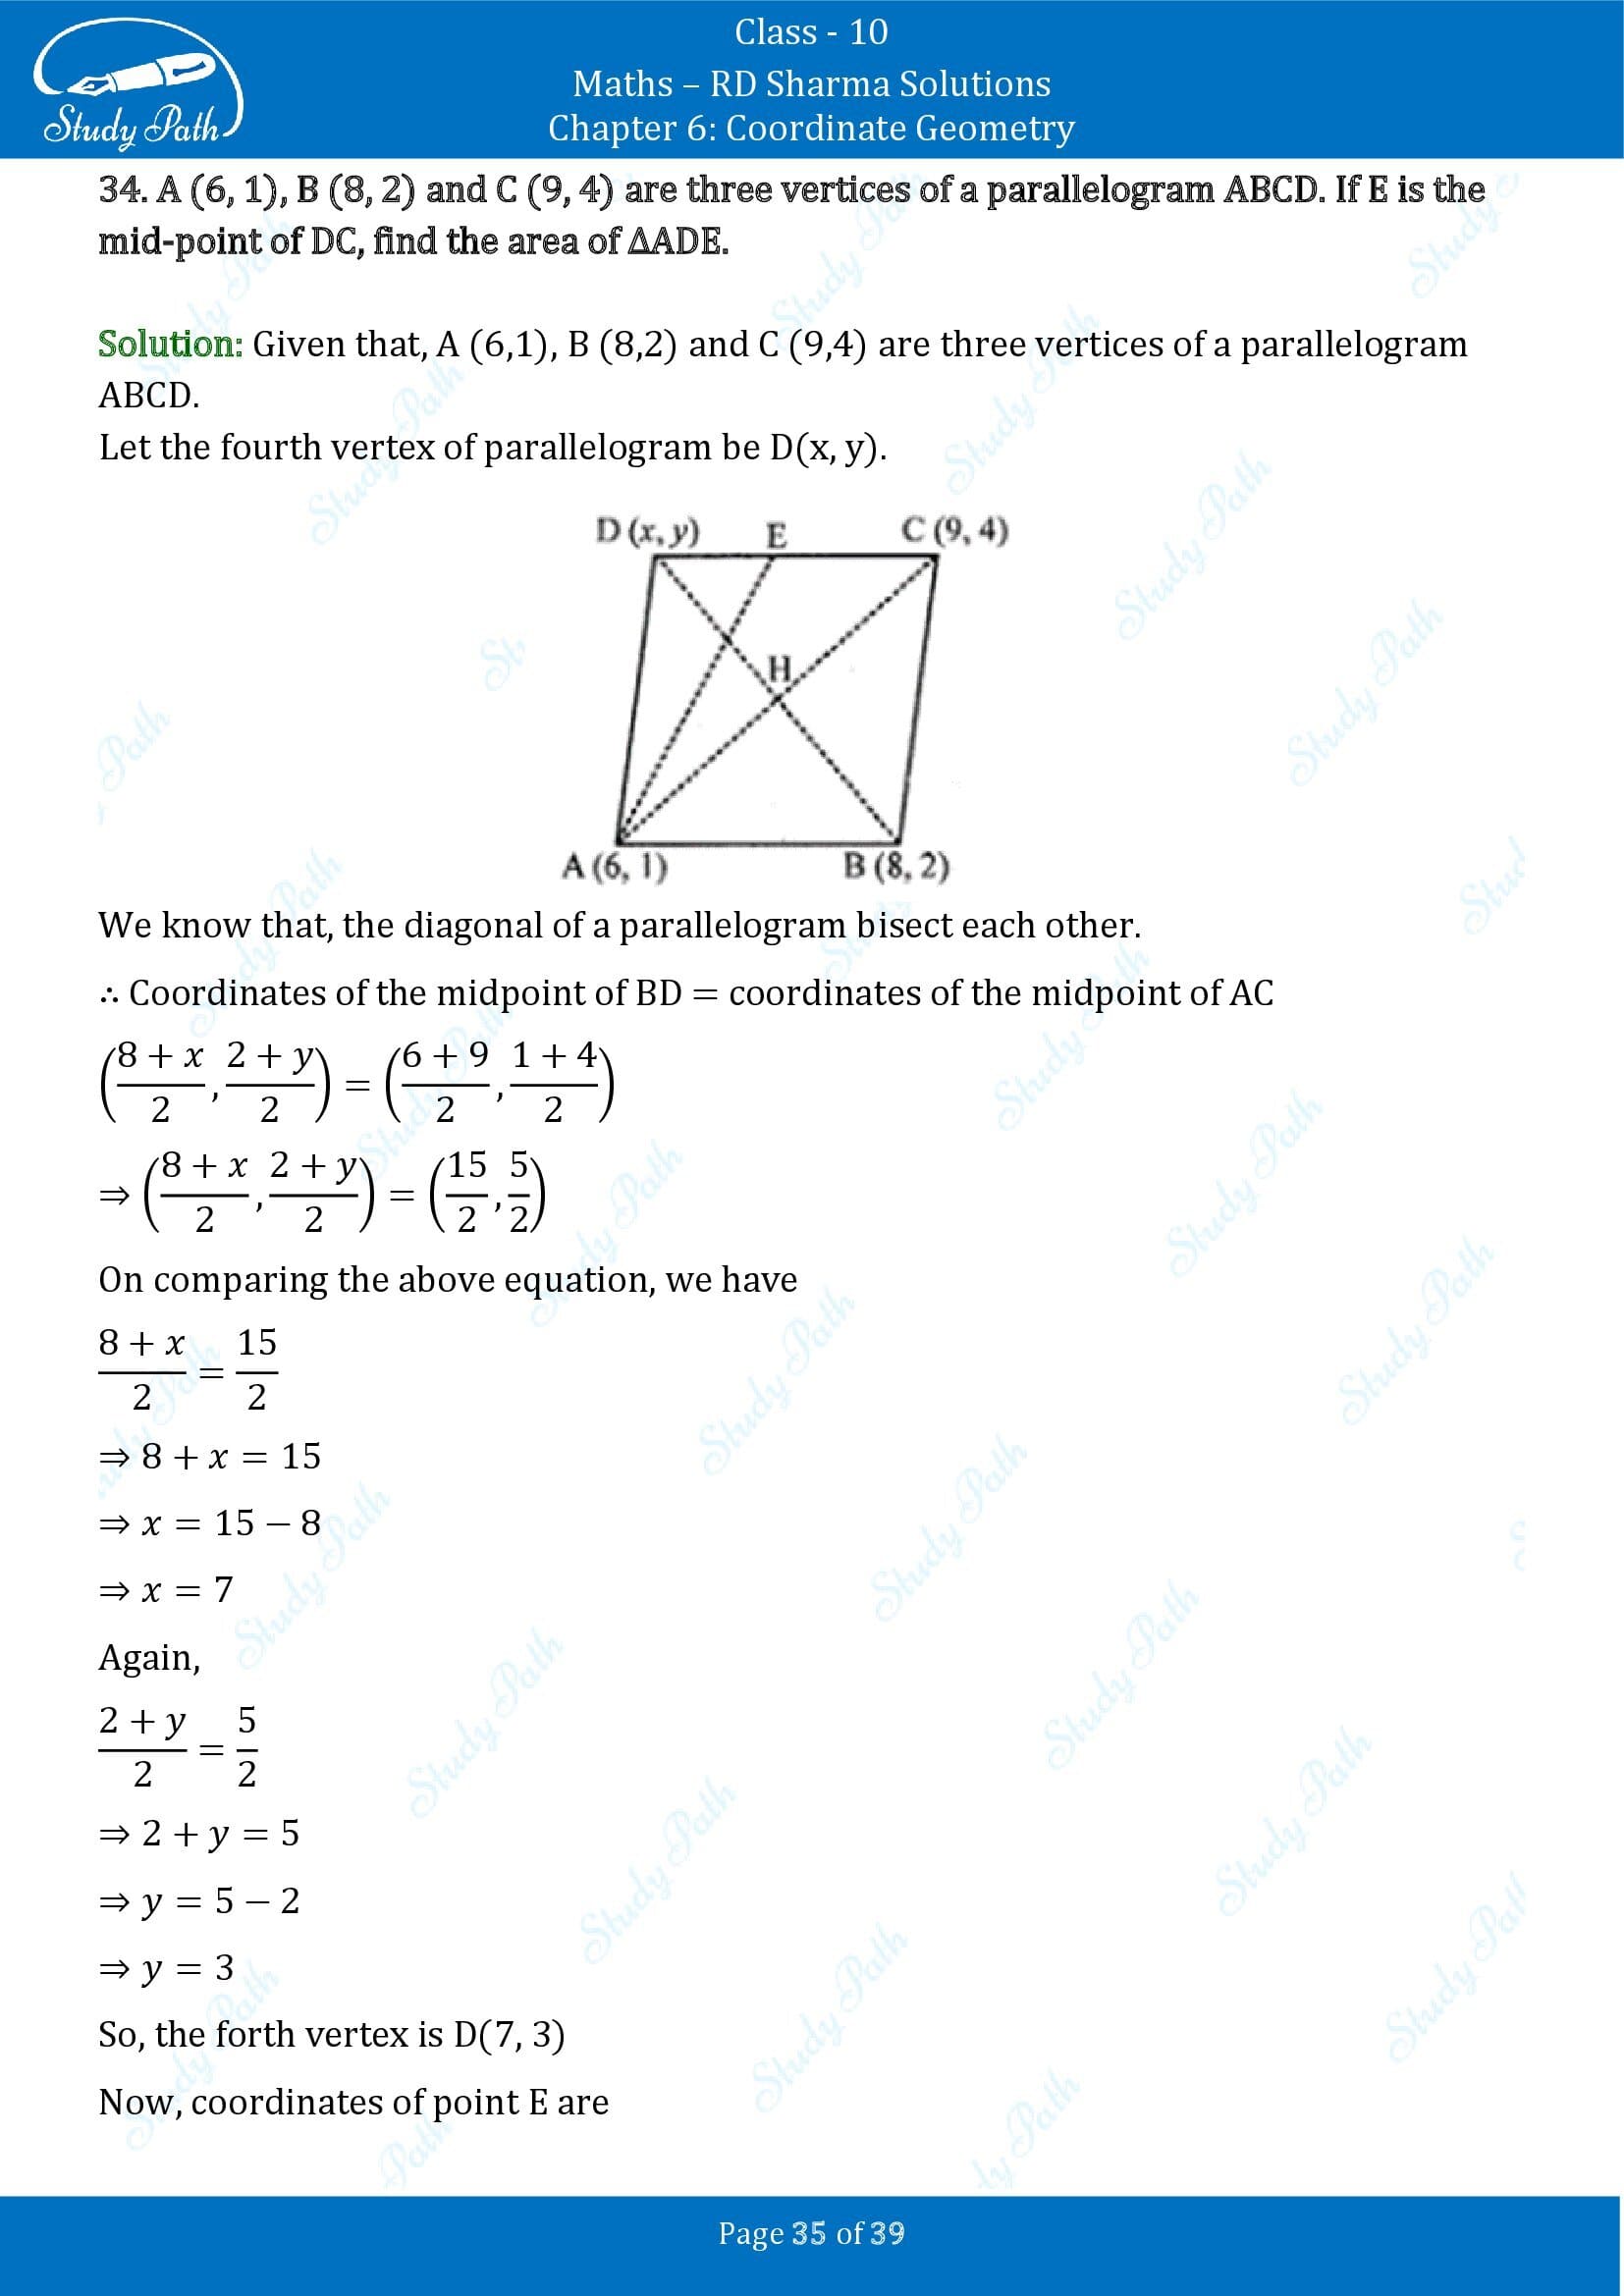 RD Sharma Solutions Class 10 Chapter 6 Coordinate Geometry Exercise 6.5 0035